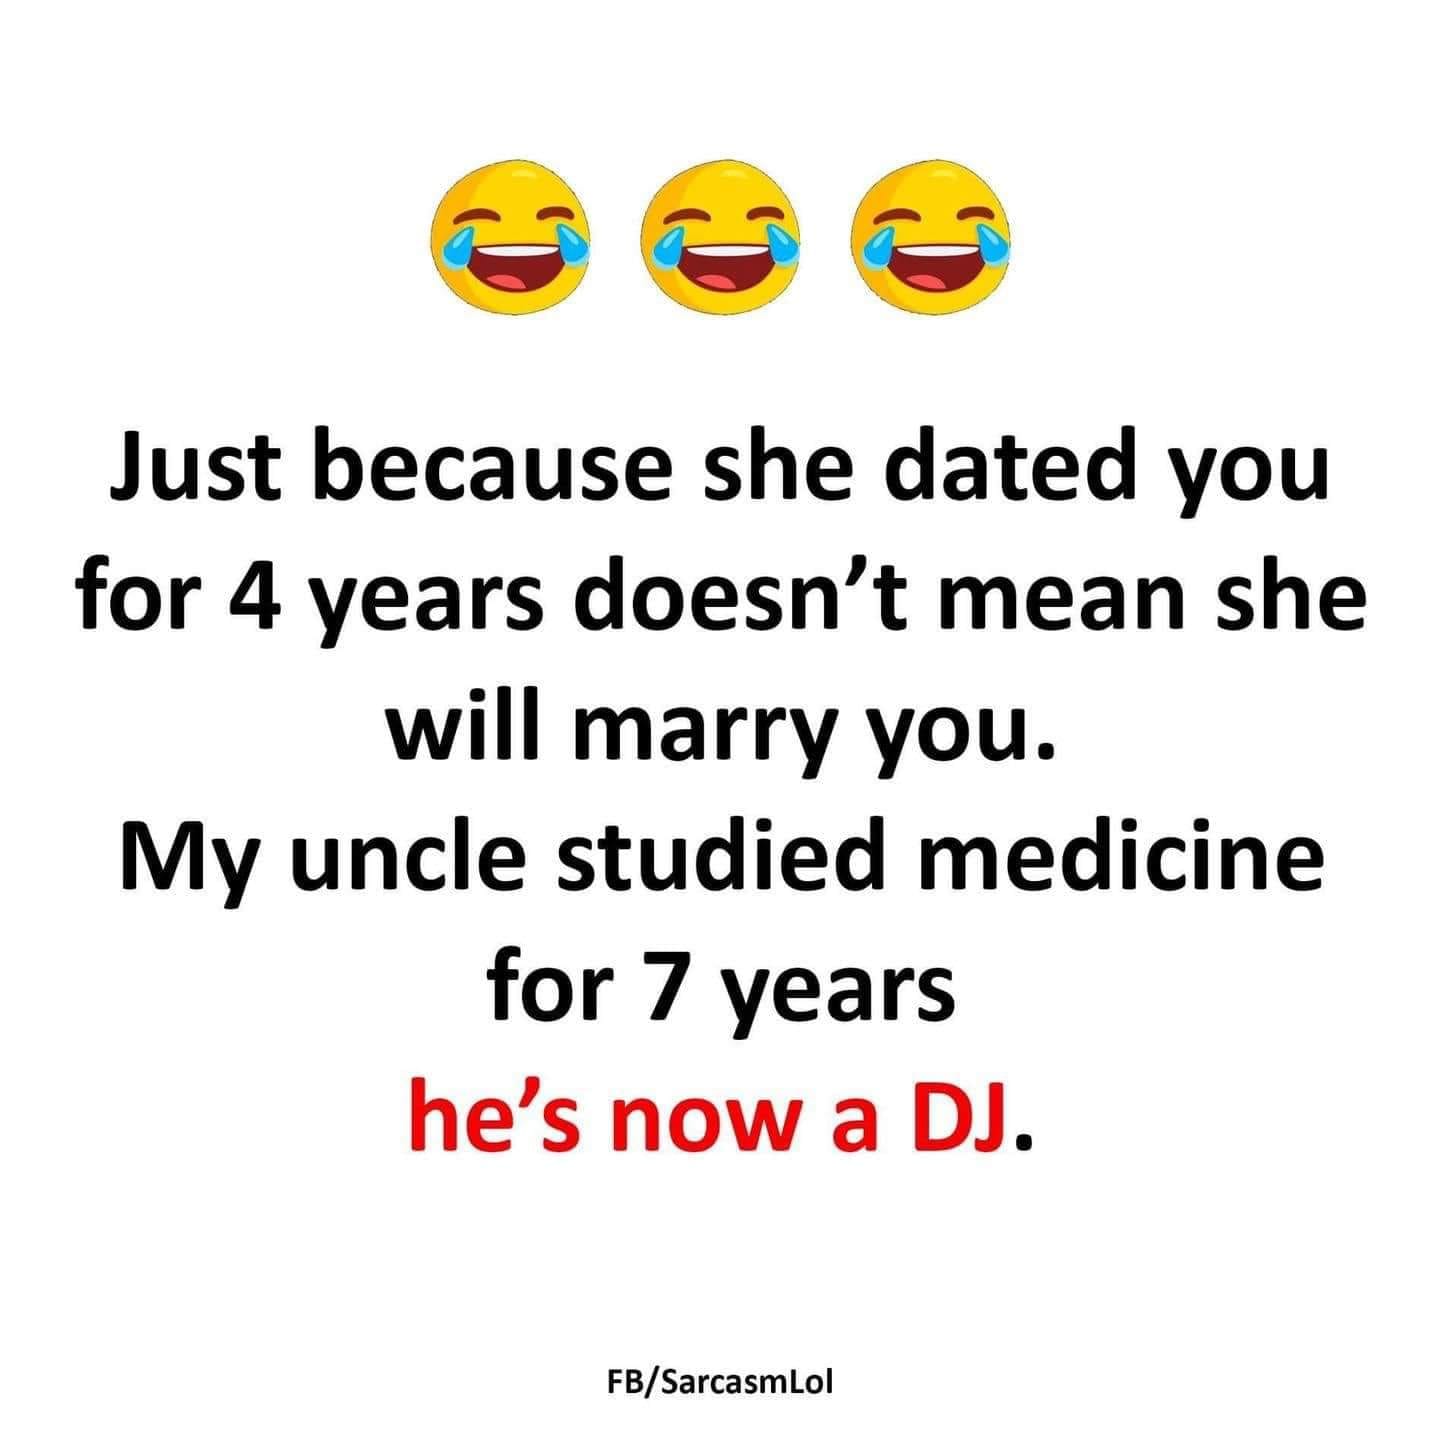 monday morning randomness - my uncle studied medicine but became a dj - Just because she dated you for 4 years doesn't mean she will marry you. My uncle studied medicine for 7 years he's now a Dj. FbSarcasmLol